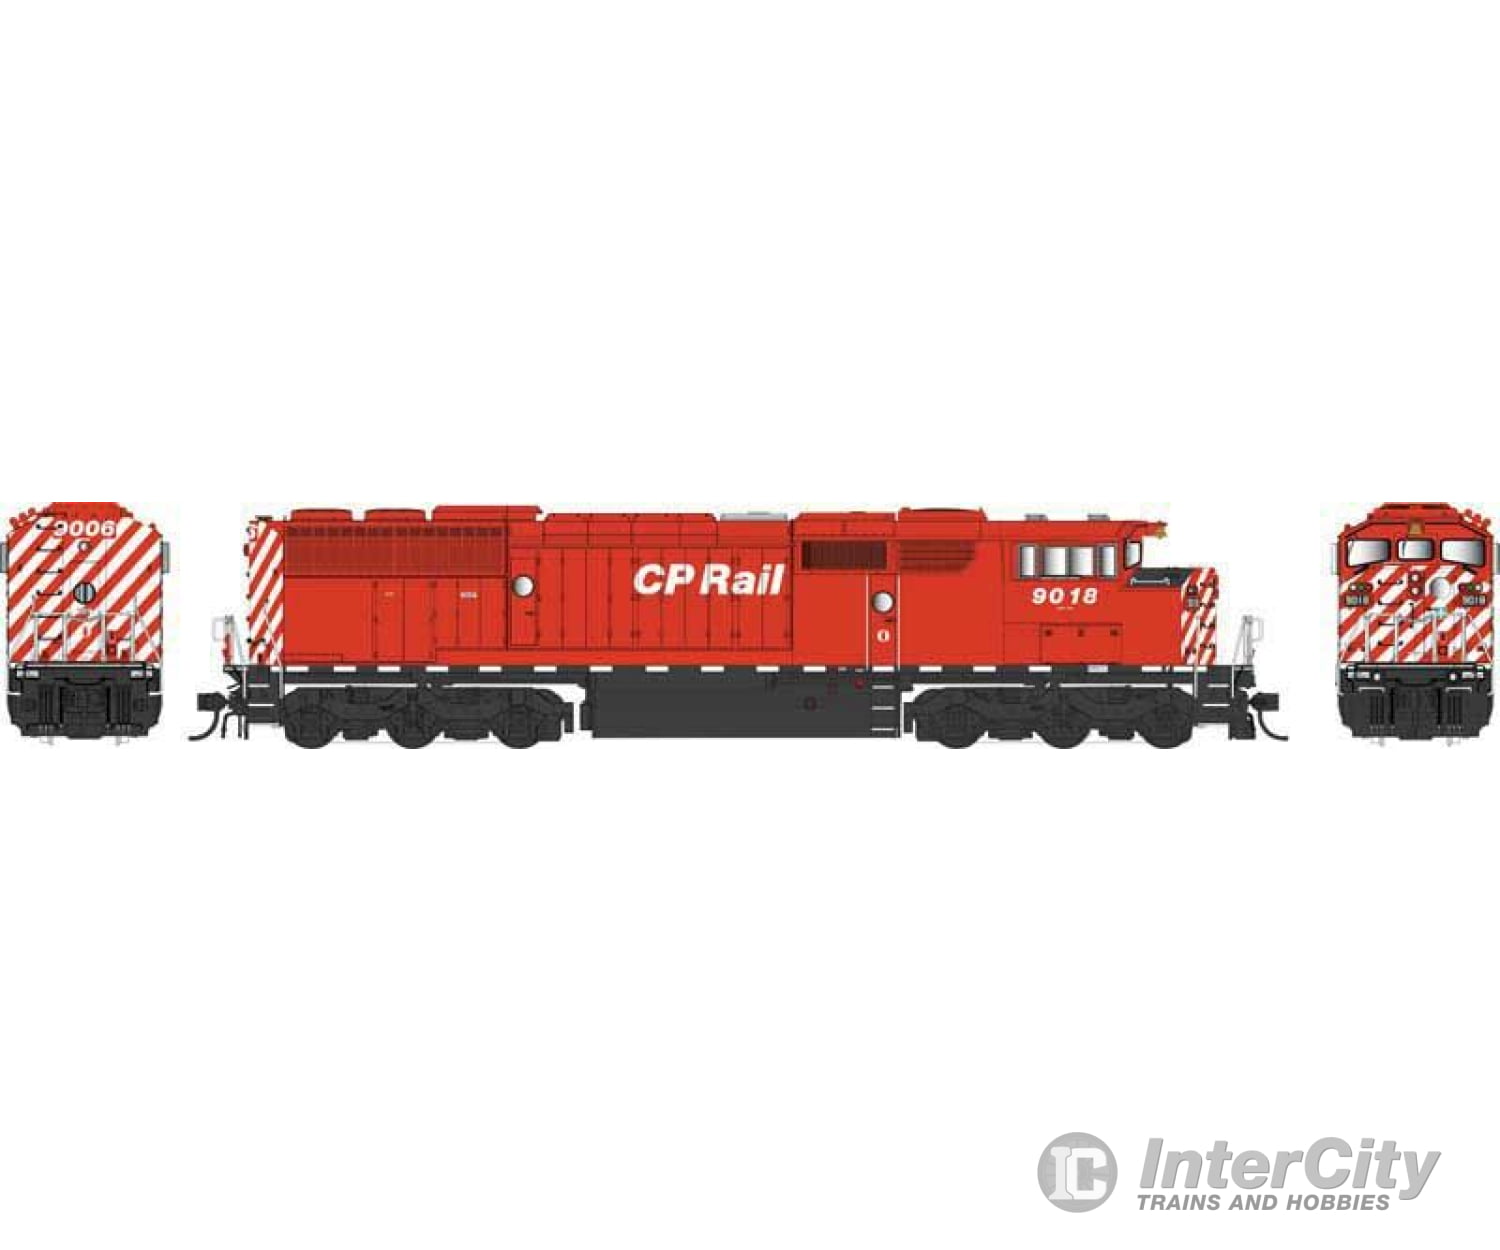 Bowser 25005 Ho Gmd Sd40-2F - Loksound & Dcc Executive Line -- Canadian Pacific #9018 (Action Red